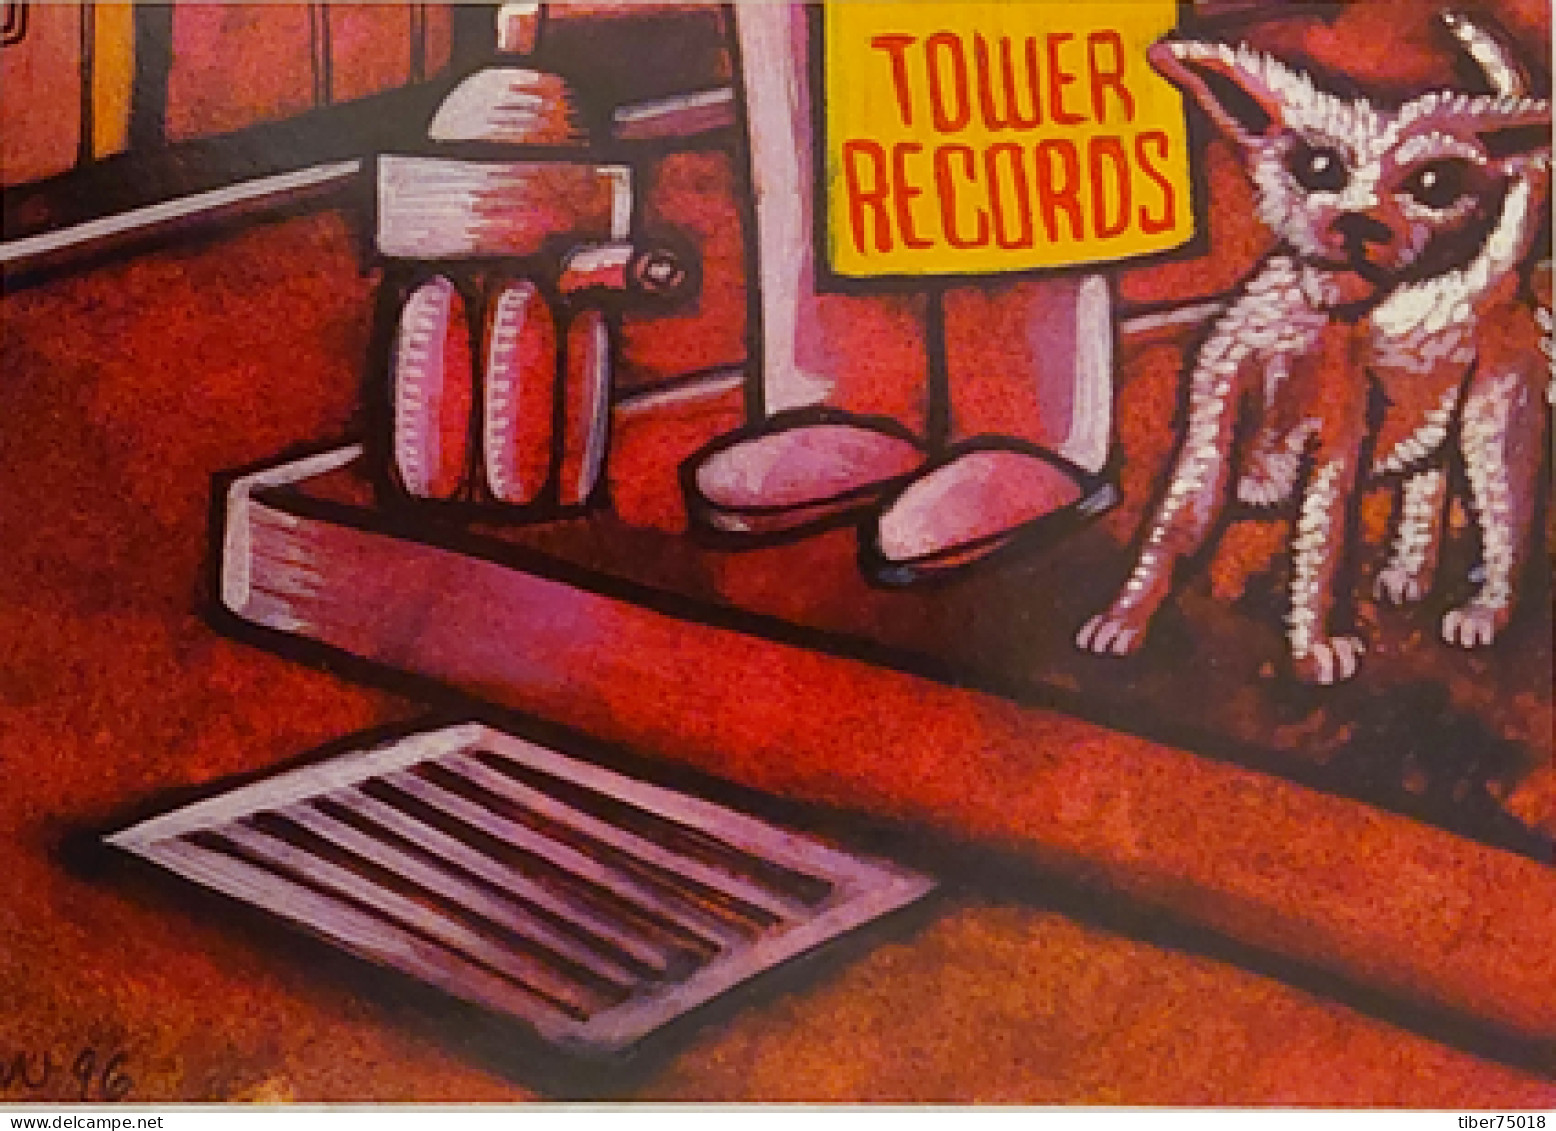 Carte Postale (Tower Records) Tower, The Internet's Real Record Store - Illustration : Strephon Taylor - Pubblicitari